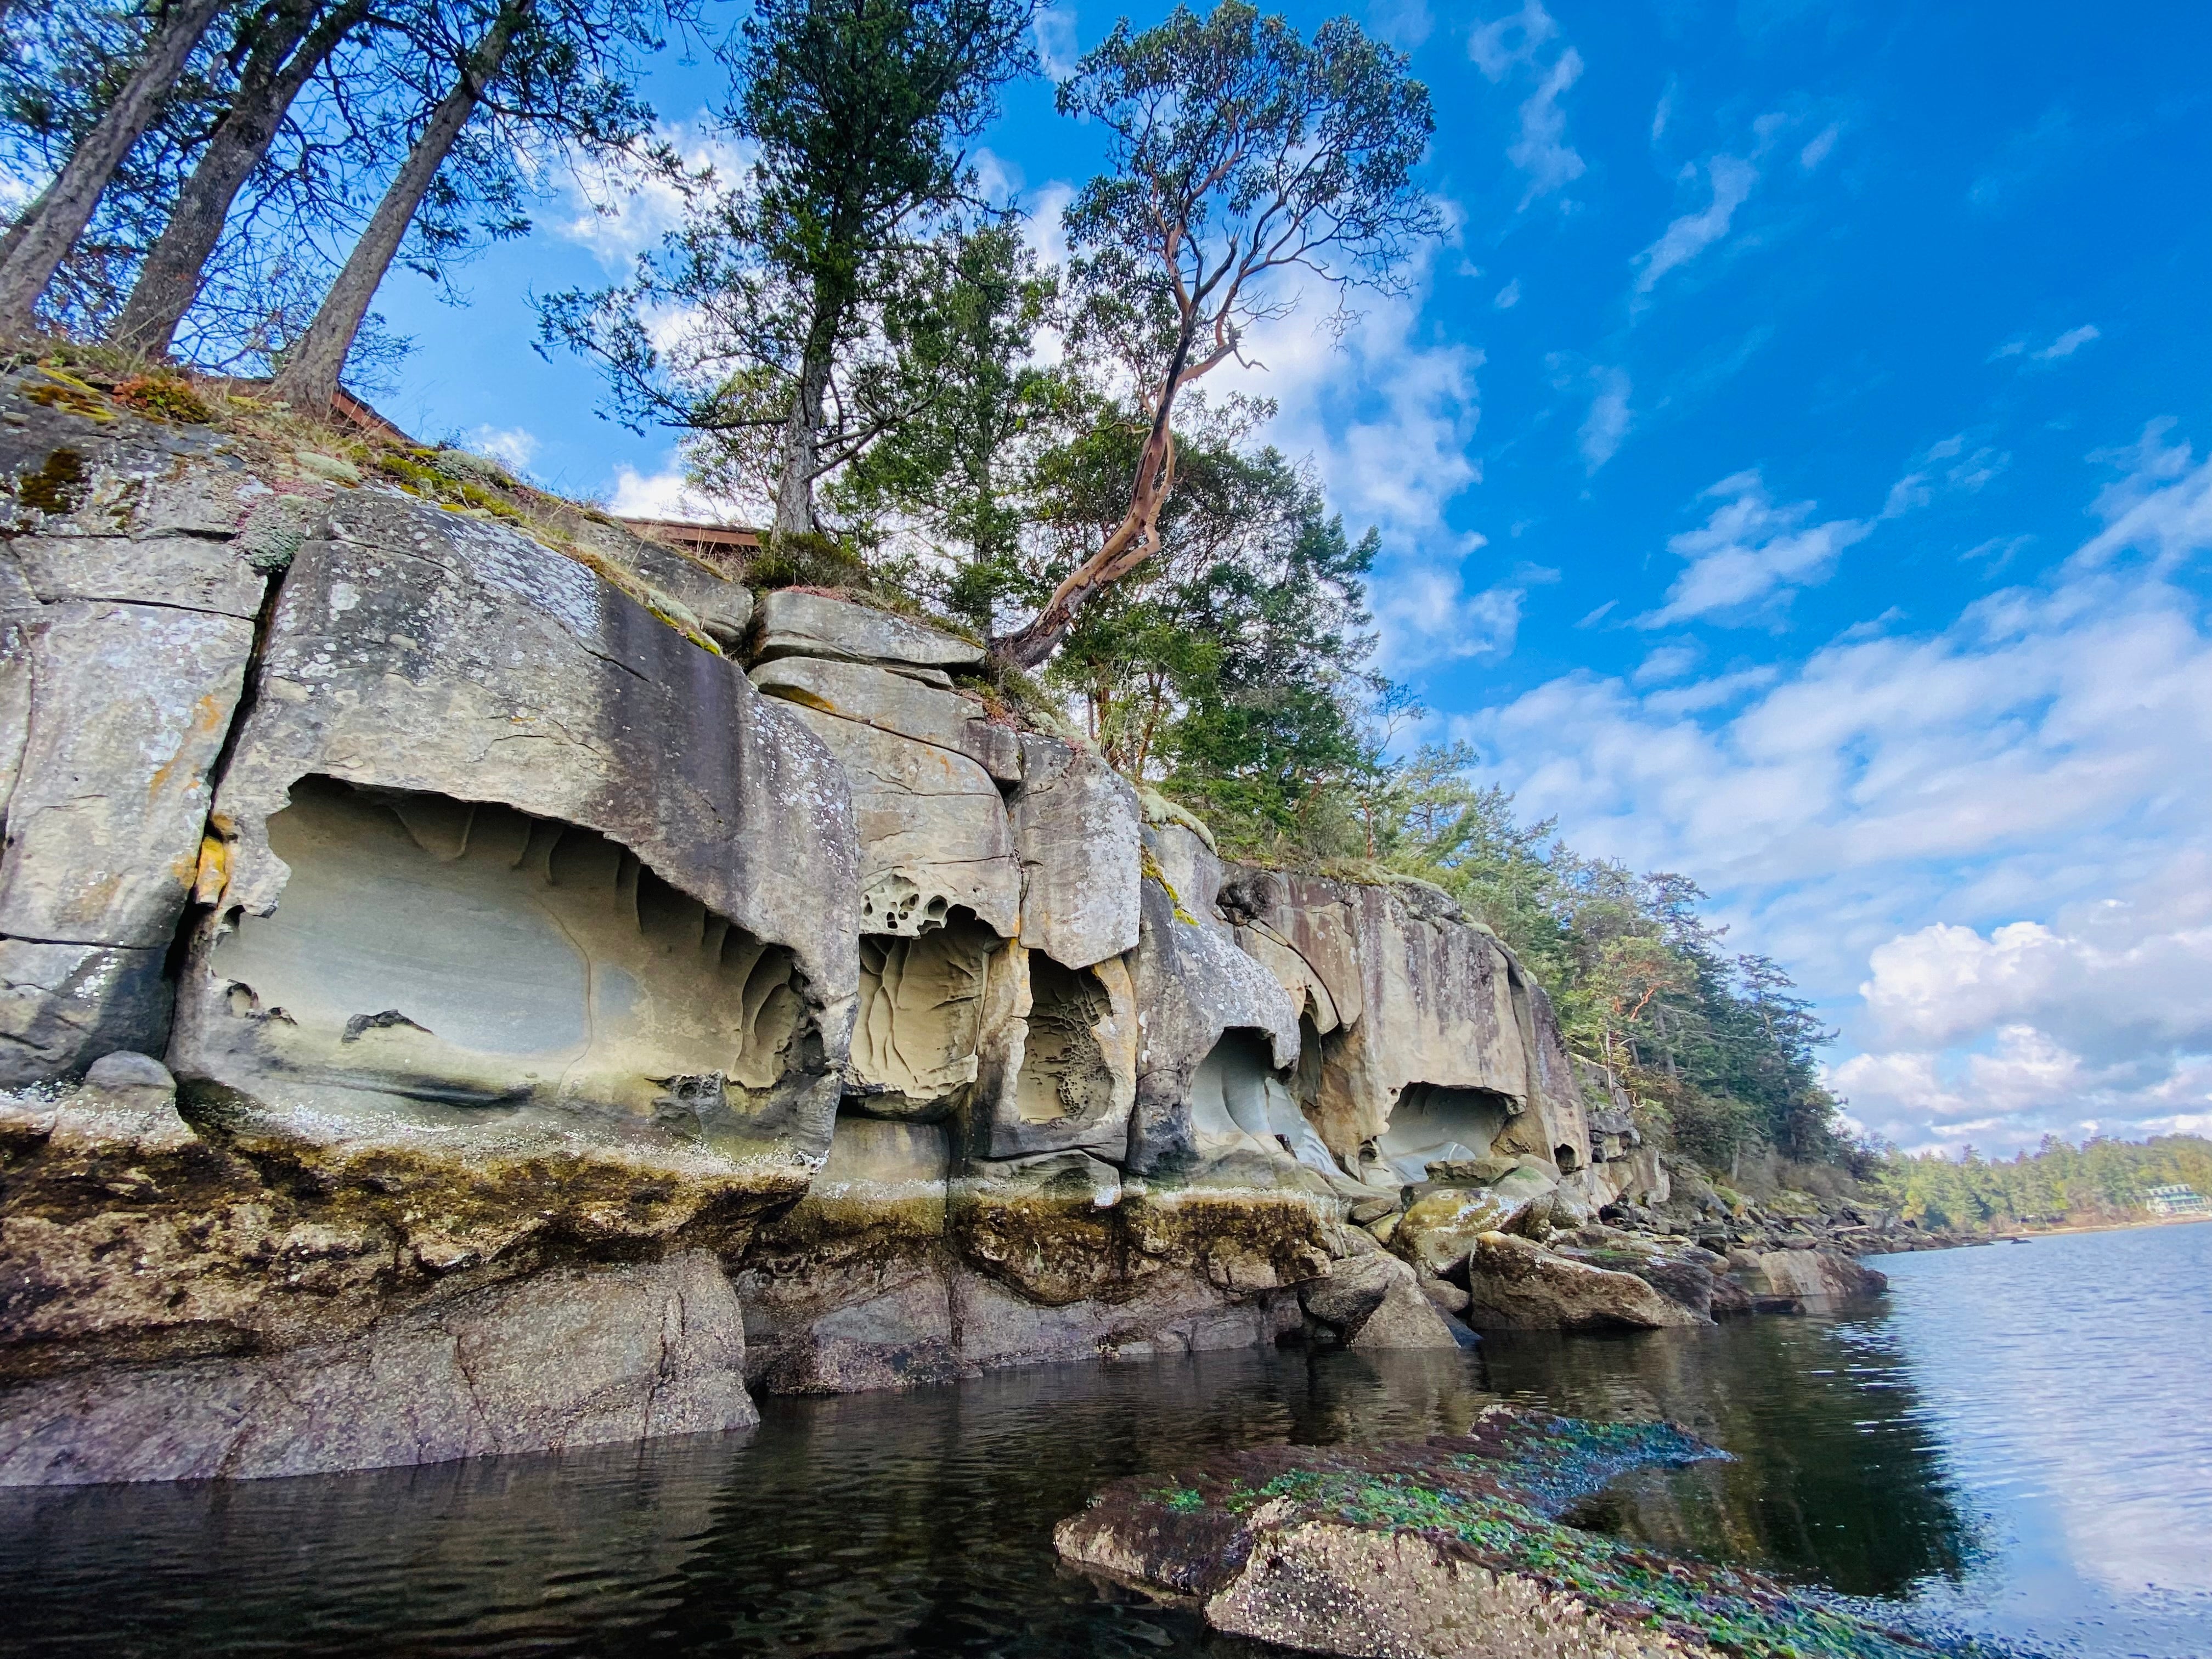 Sandstone cliffs at Yellow Point Lodge